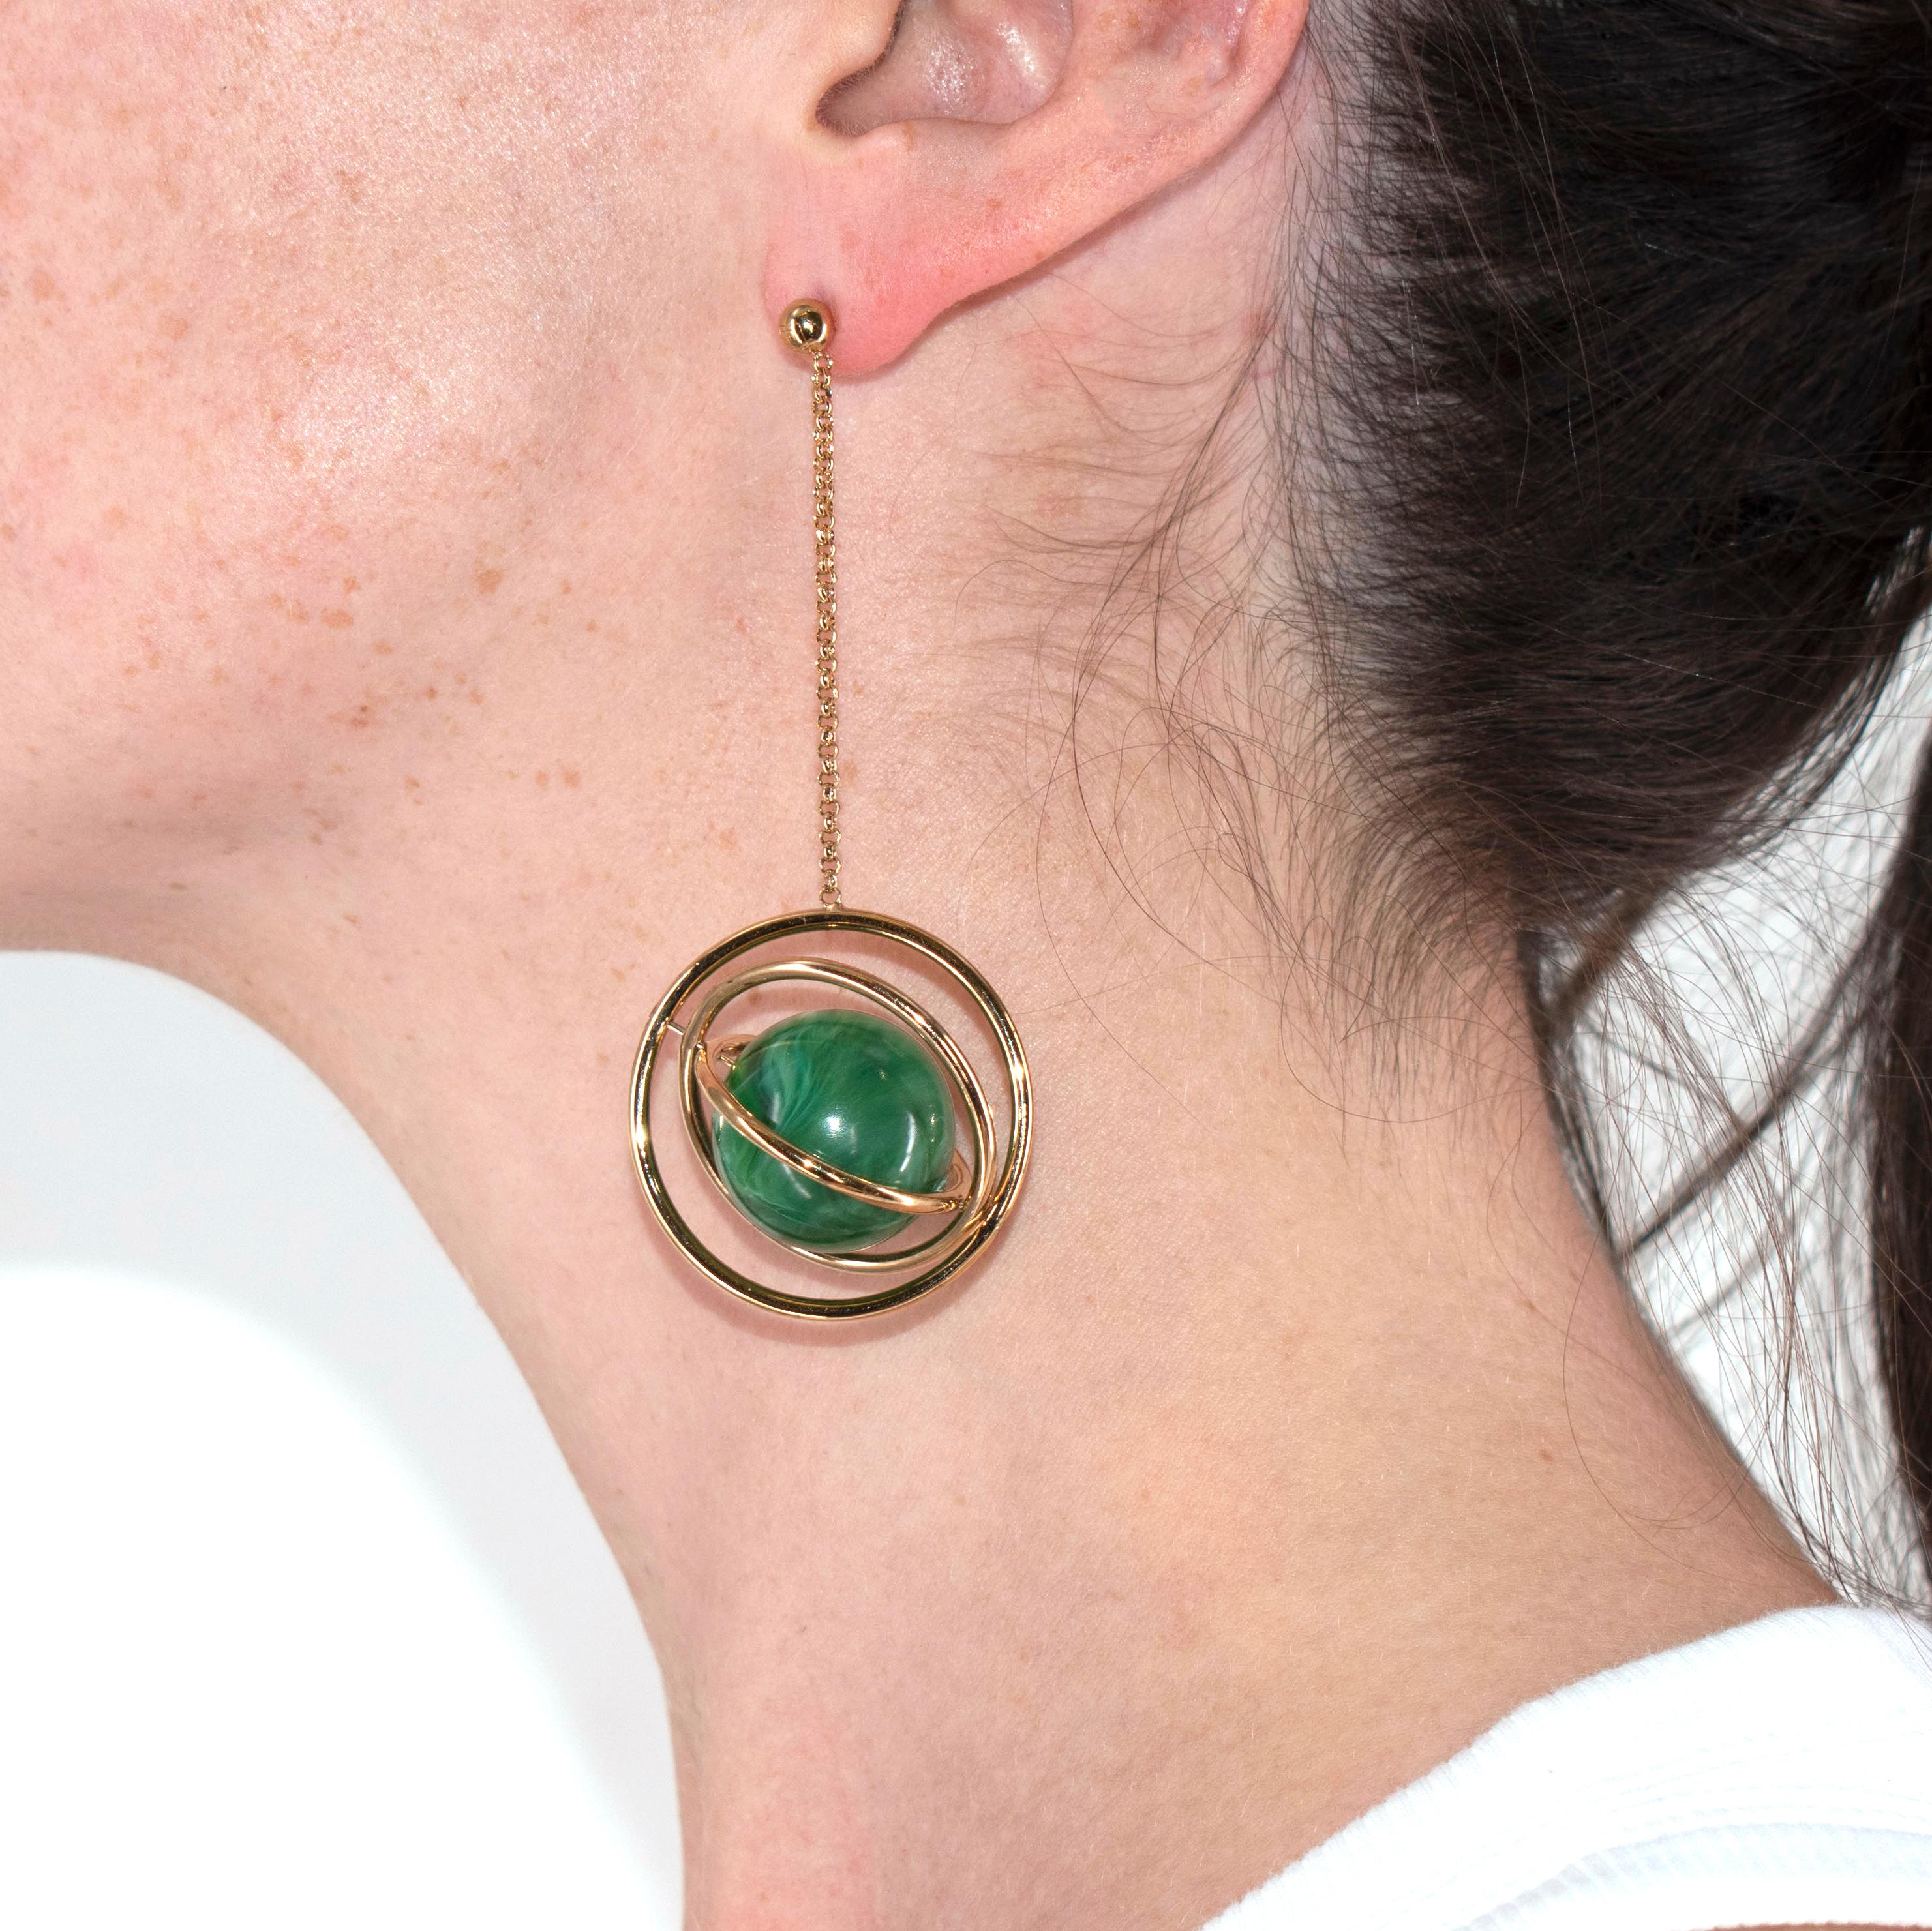 Paco Rabanne Saturn Faux-Malachite Pendant Earring

- Drop earring in gold-tone metal with a faux-malachite Saturn' orb 
- Post fastening for pierced ears

Measurements:
7.5cm length 
3.5cm width

Materials:
100% acetate
100% metal

PLEASE NOTE,